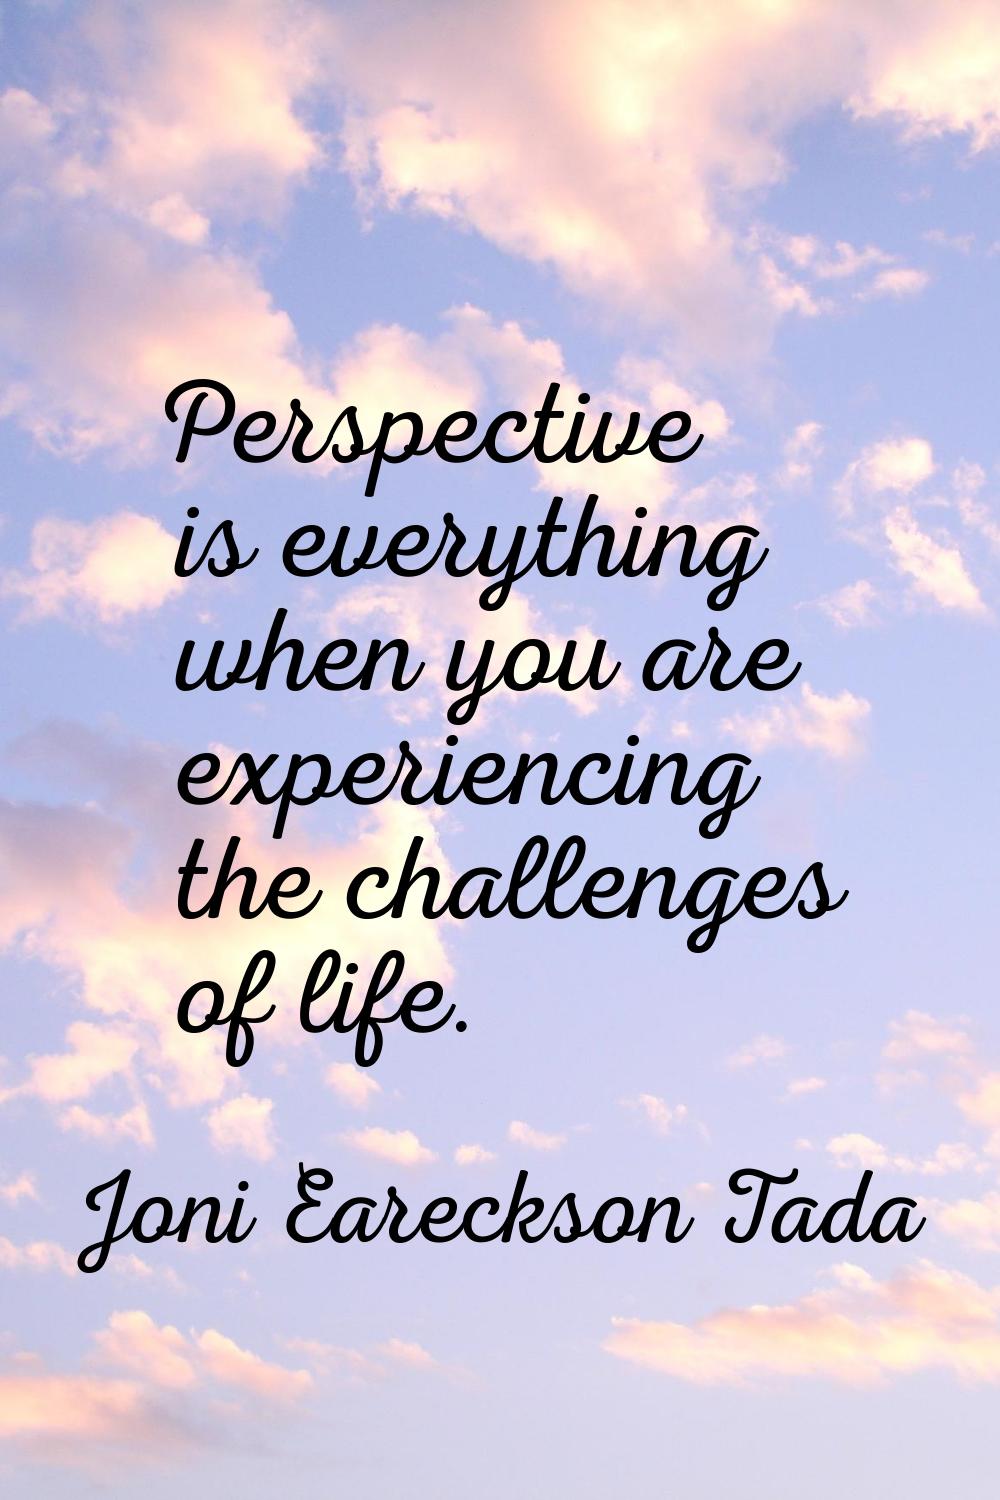 Perspective is everything when you are experiencing the challenges of life.